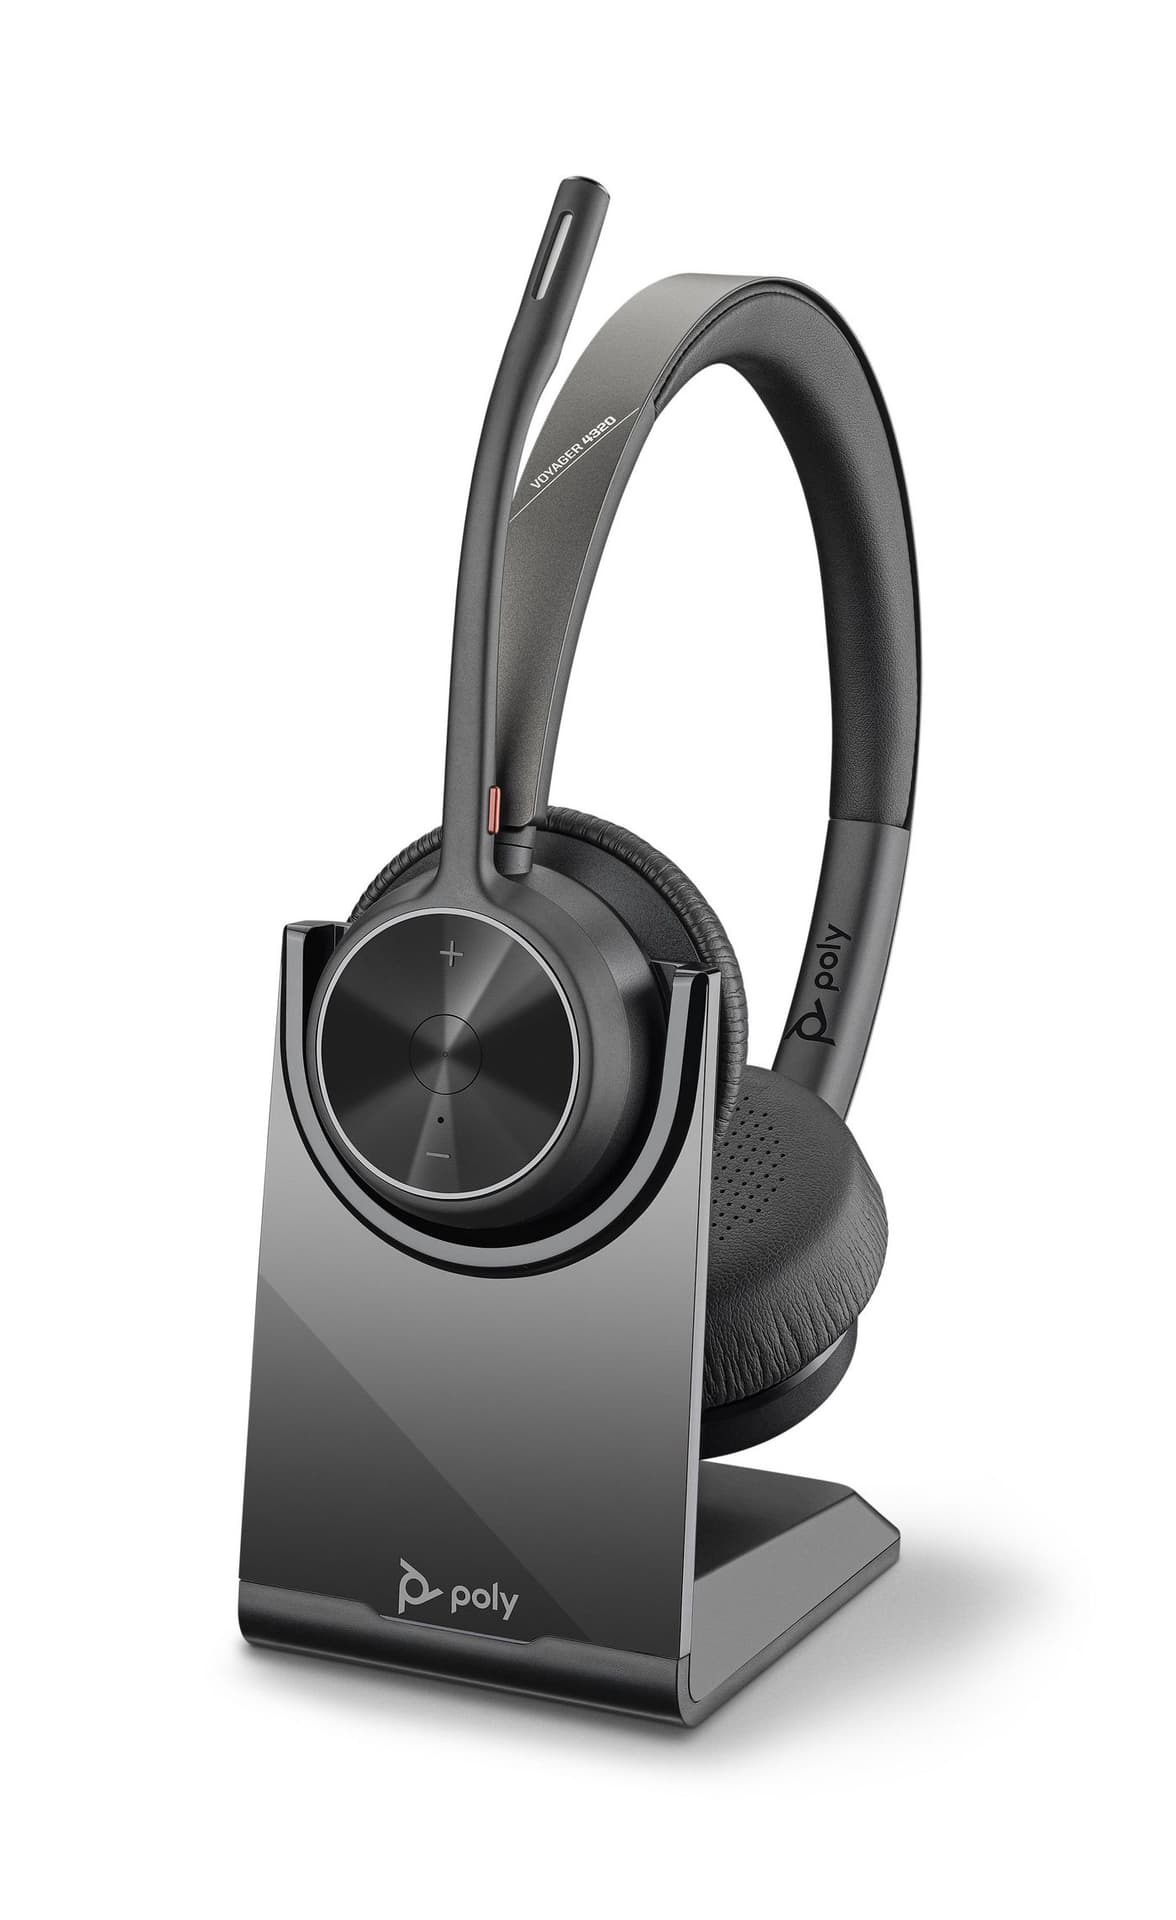 Poly Voyager 4320 UC Headset